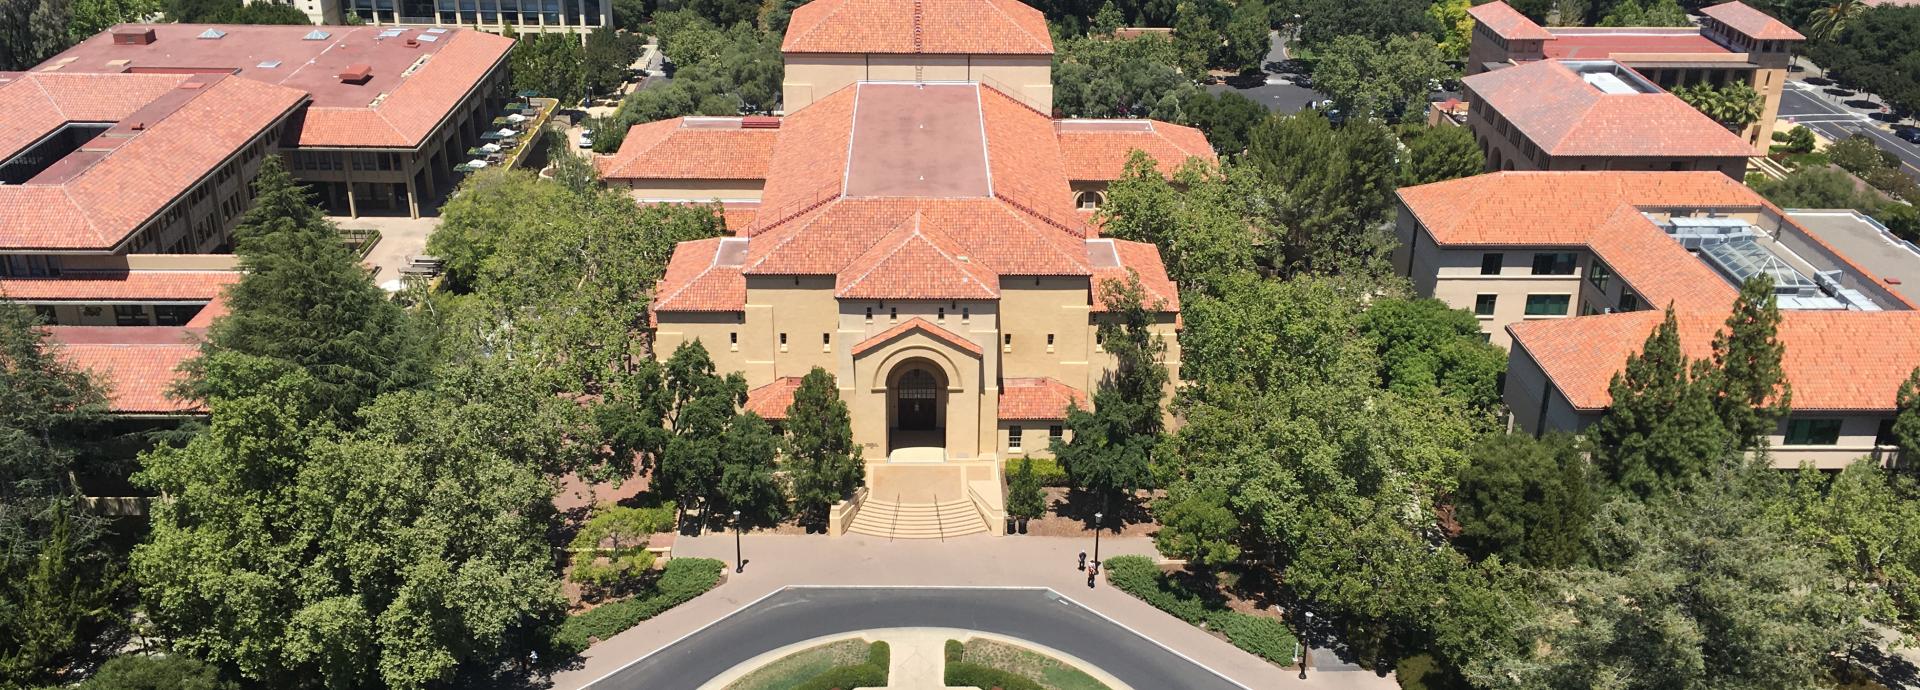 A photo of Stanford University campus in the U.S.